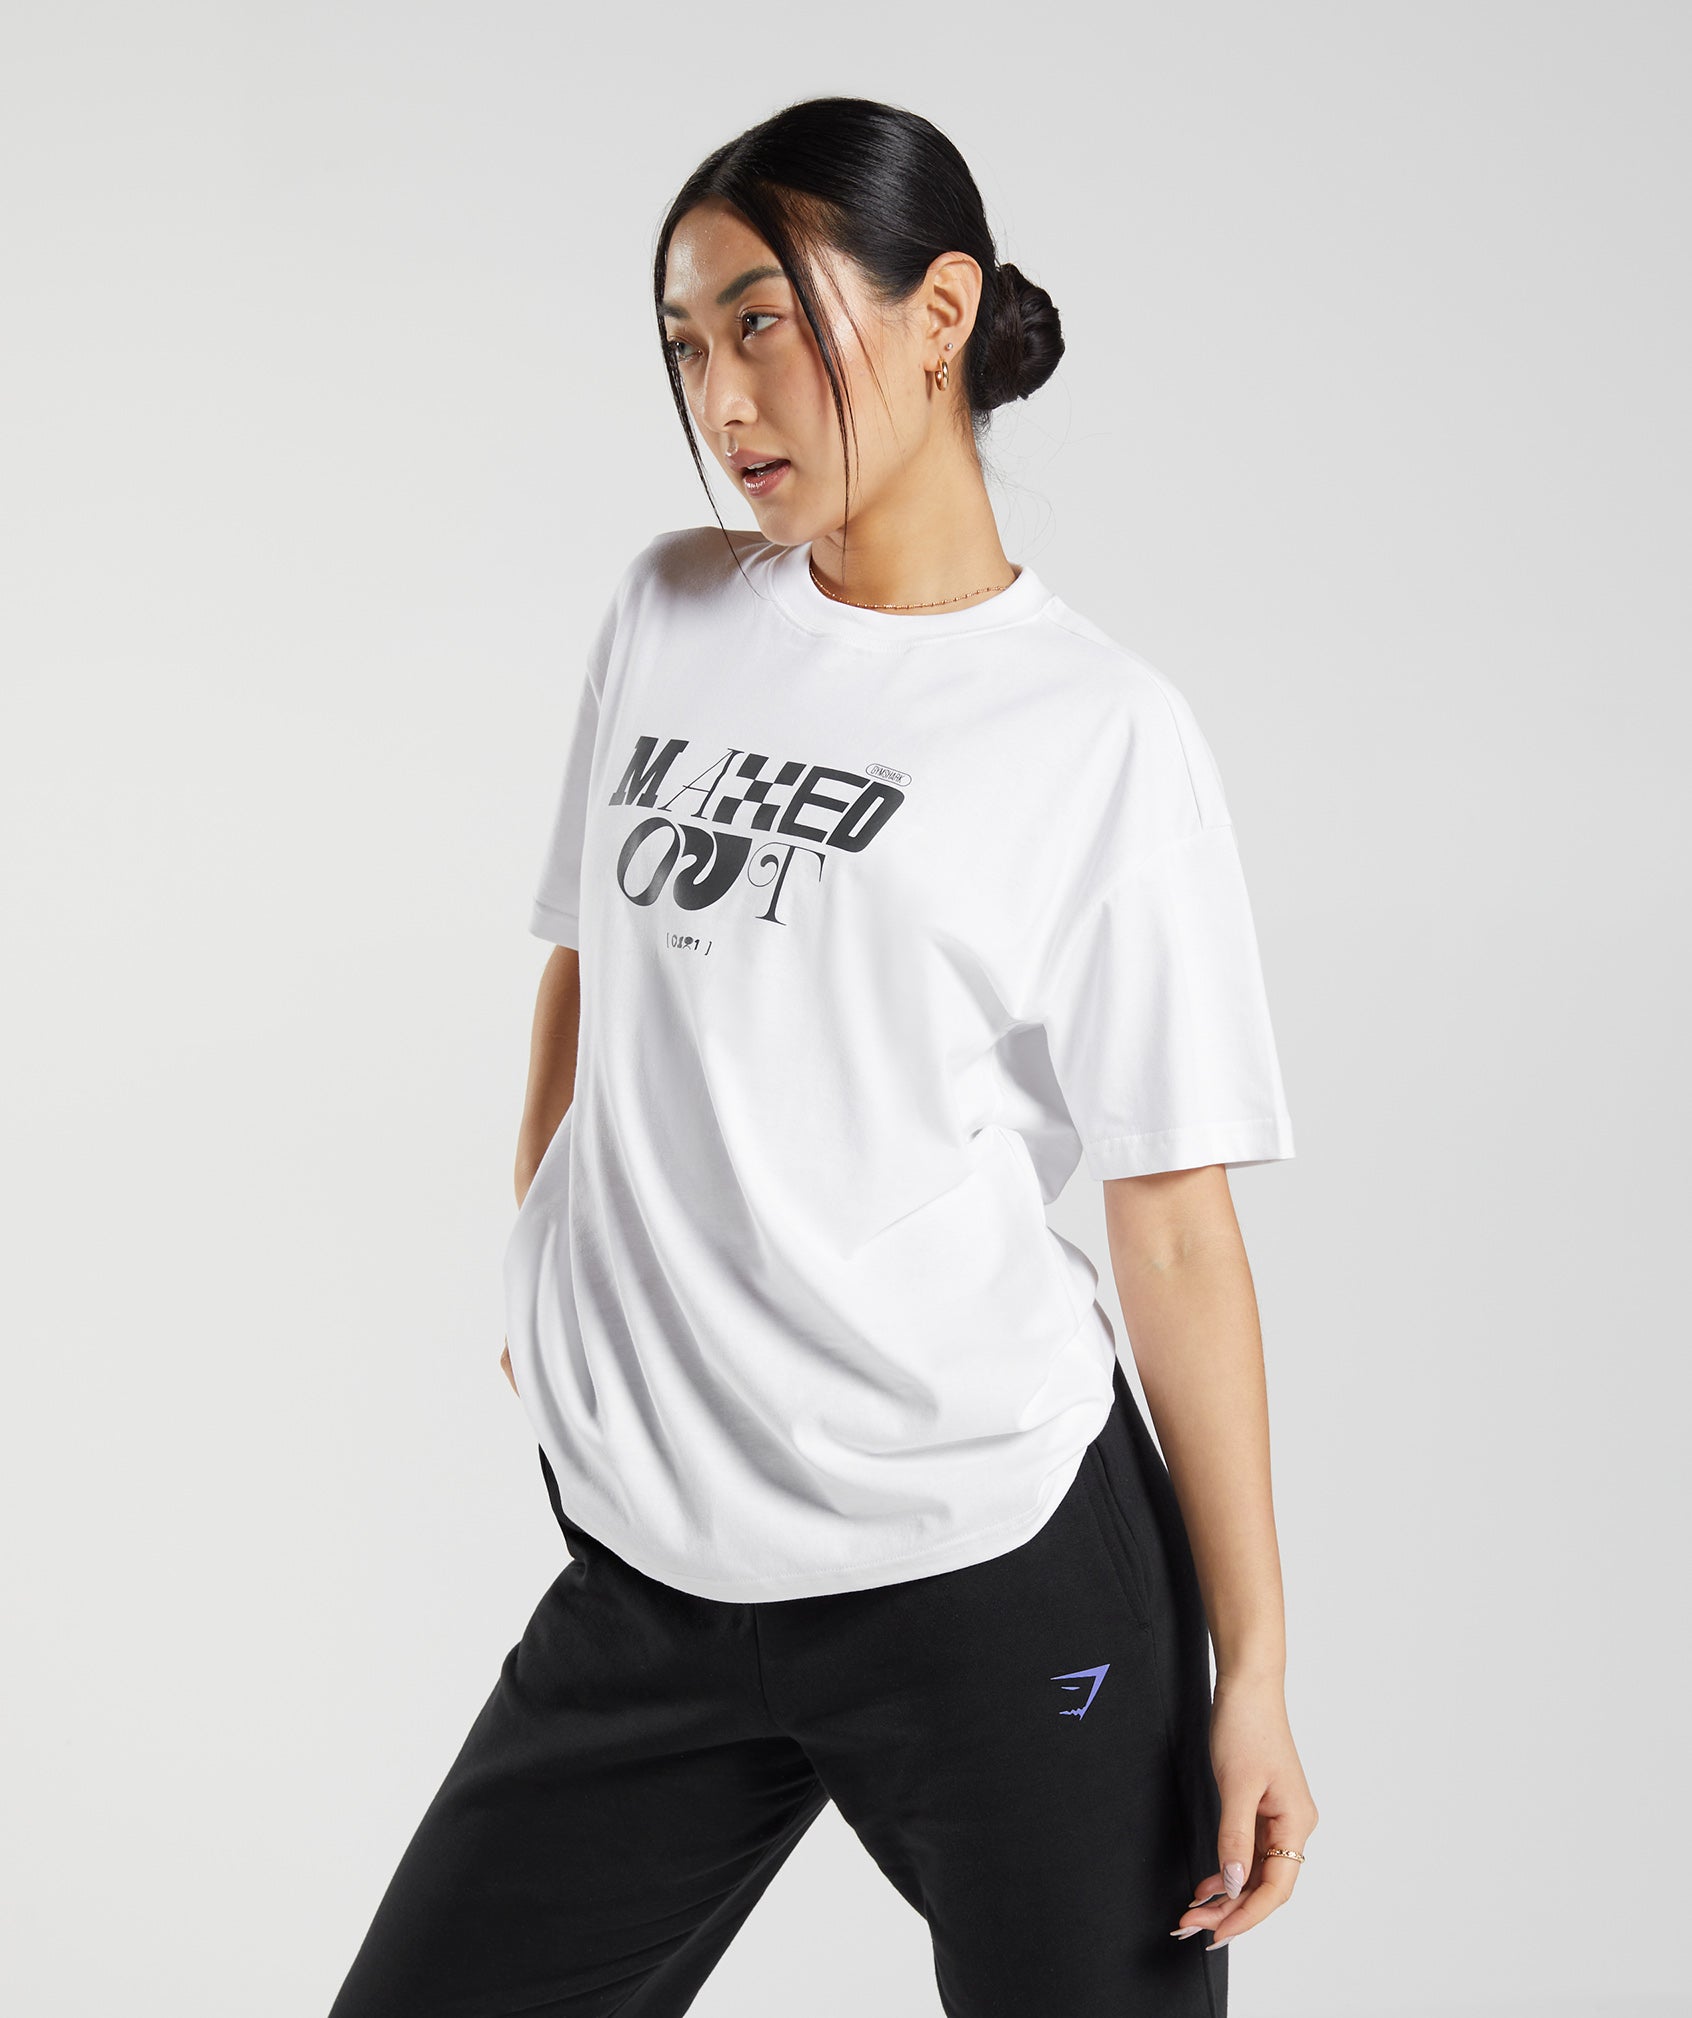 Maxed Out Oversized T-Shirt in White - view 3